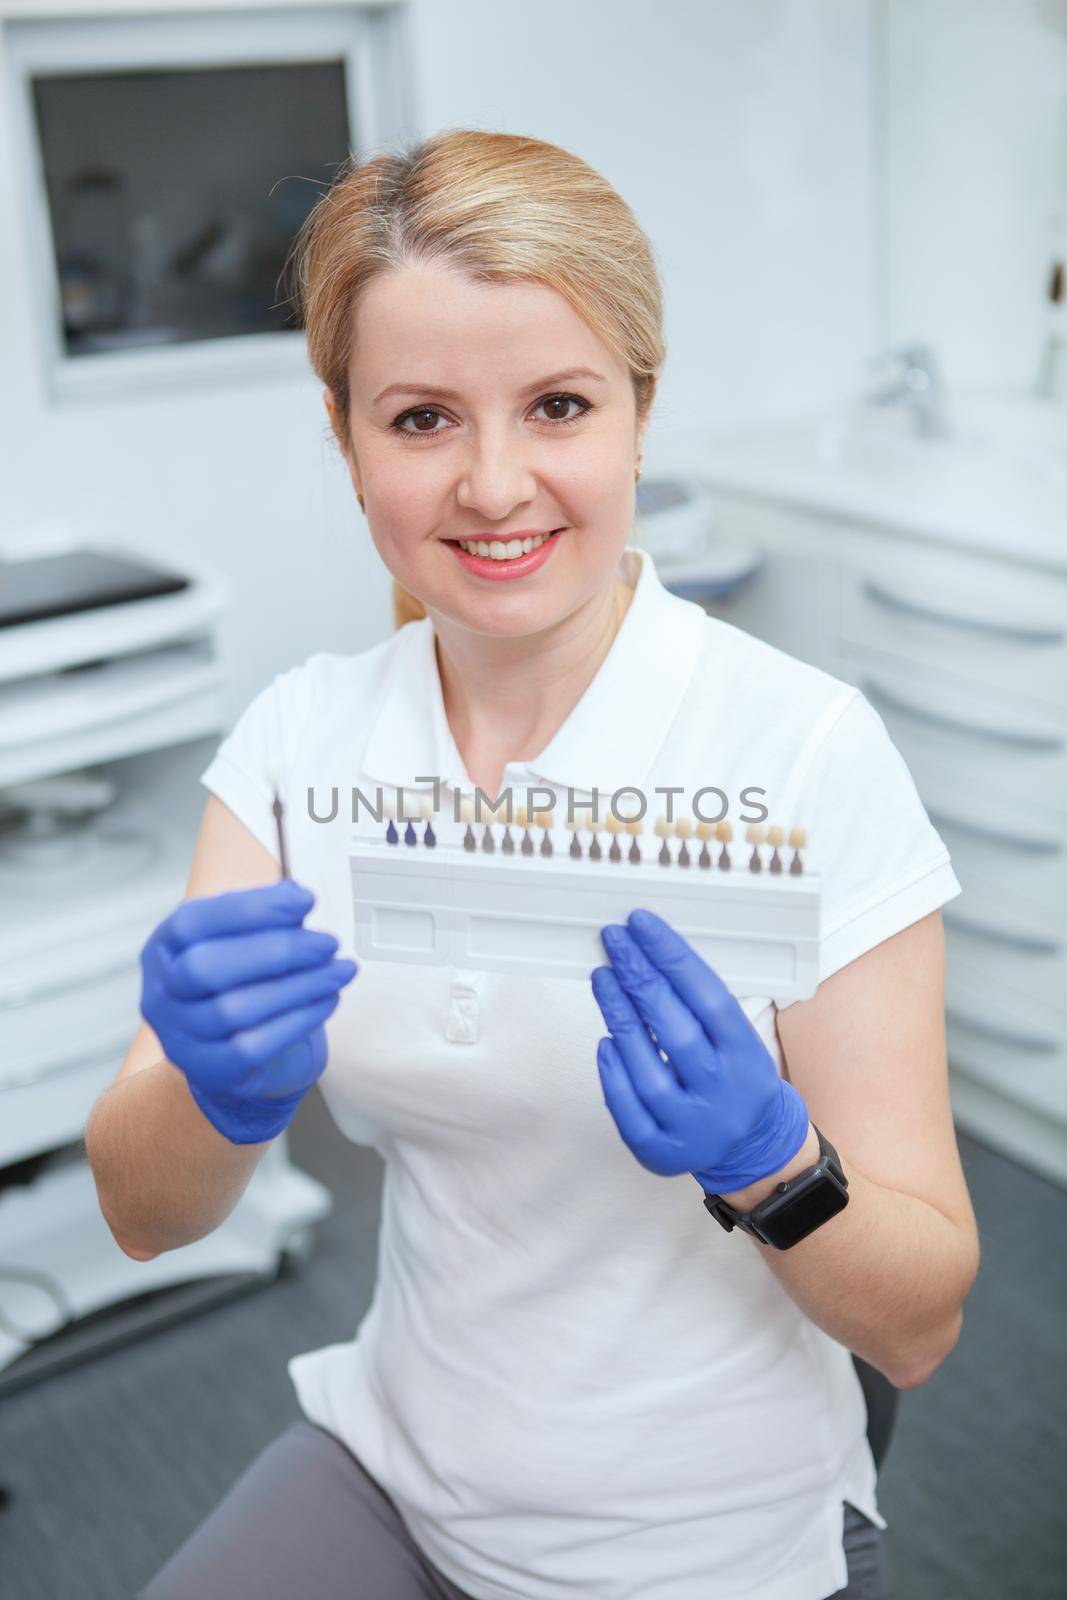 Vertical shot of a cheerful female dentist holding teeth whitening shade guide